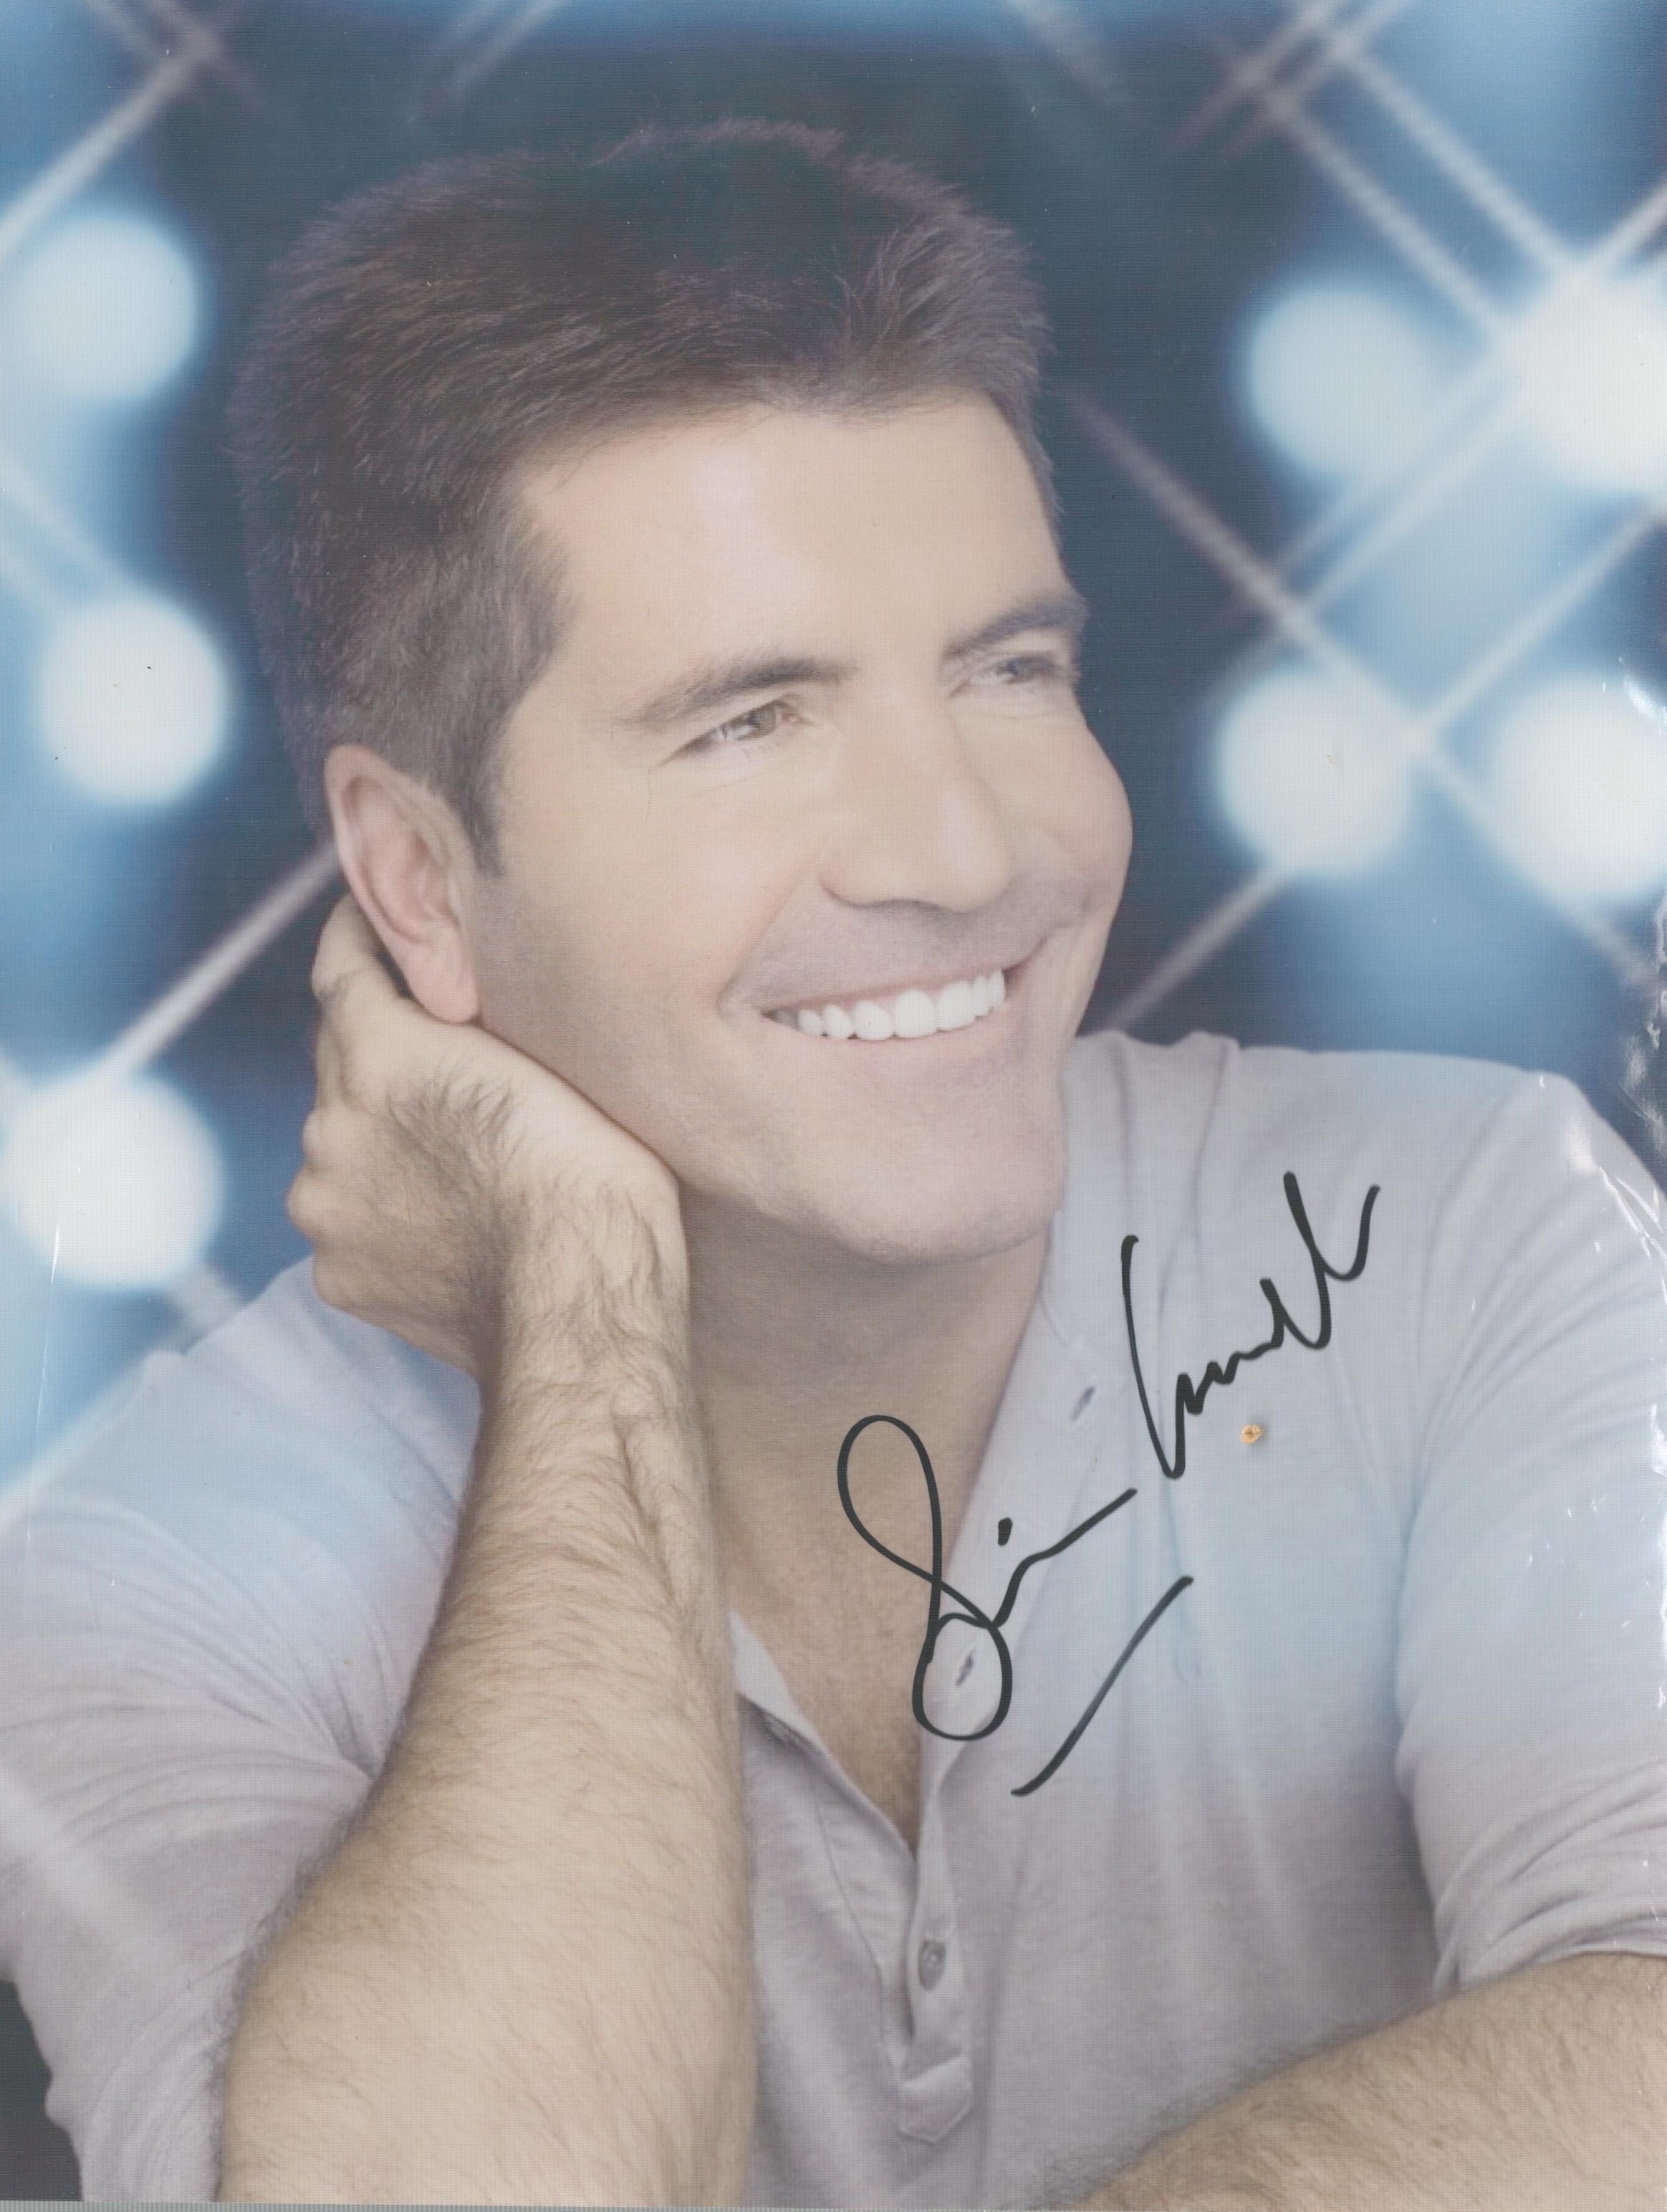 SIMON COWELL X-Factor signed 8x10 Photo. Good Condition. All autographs come with a Certificate of